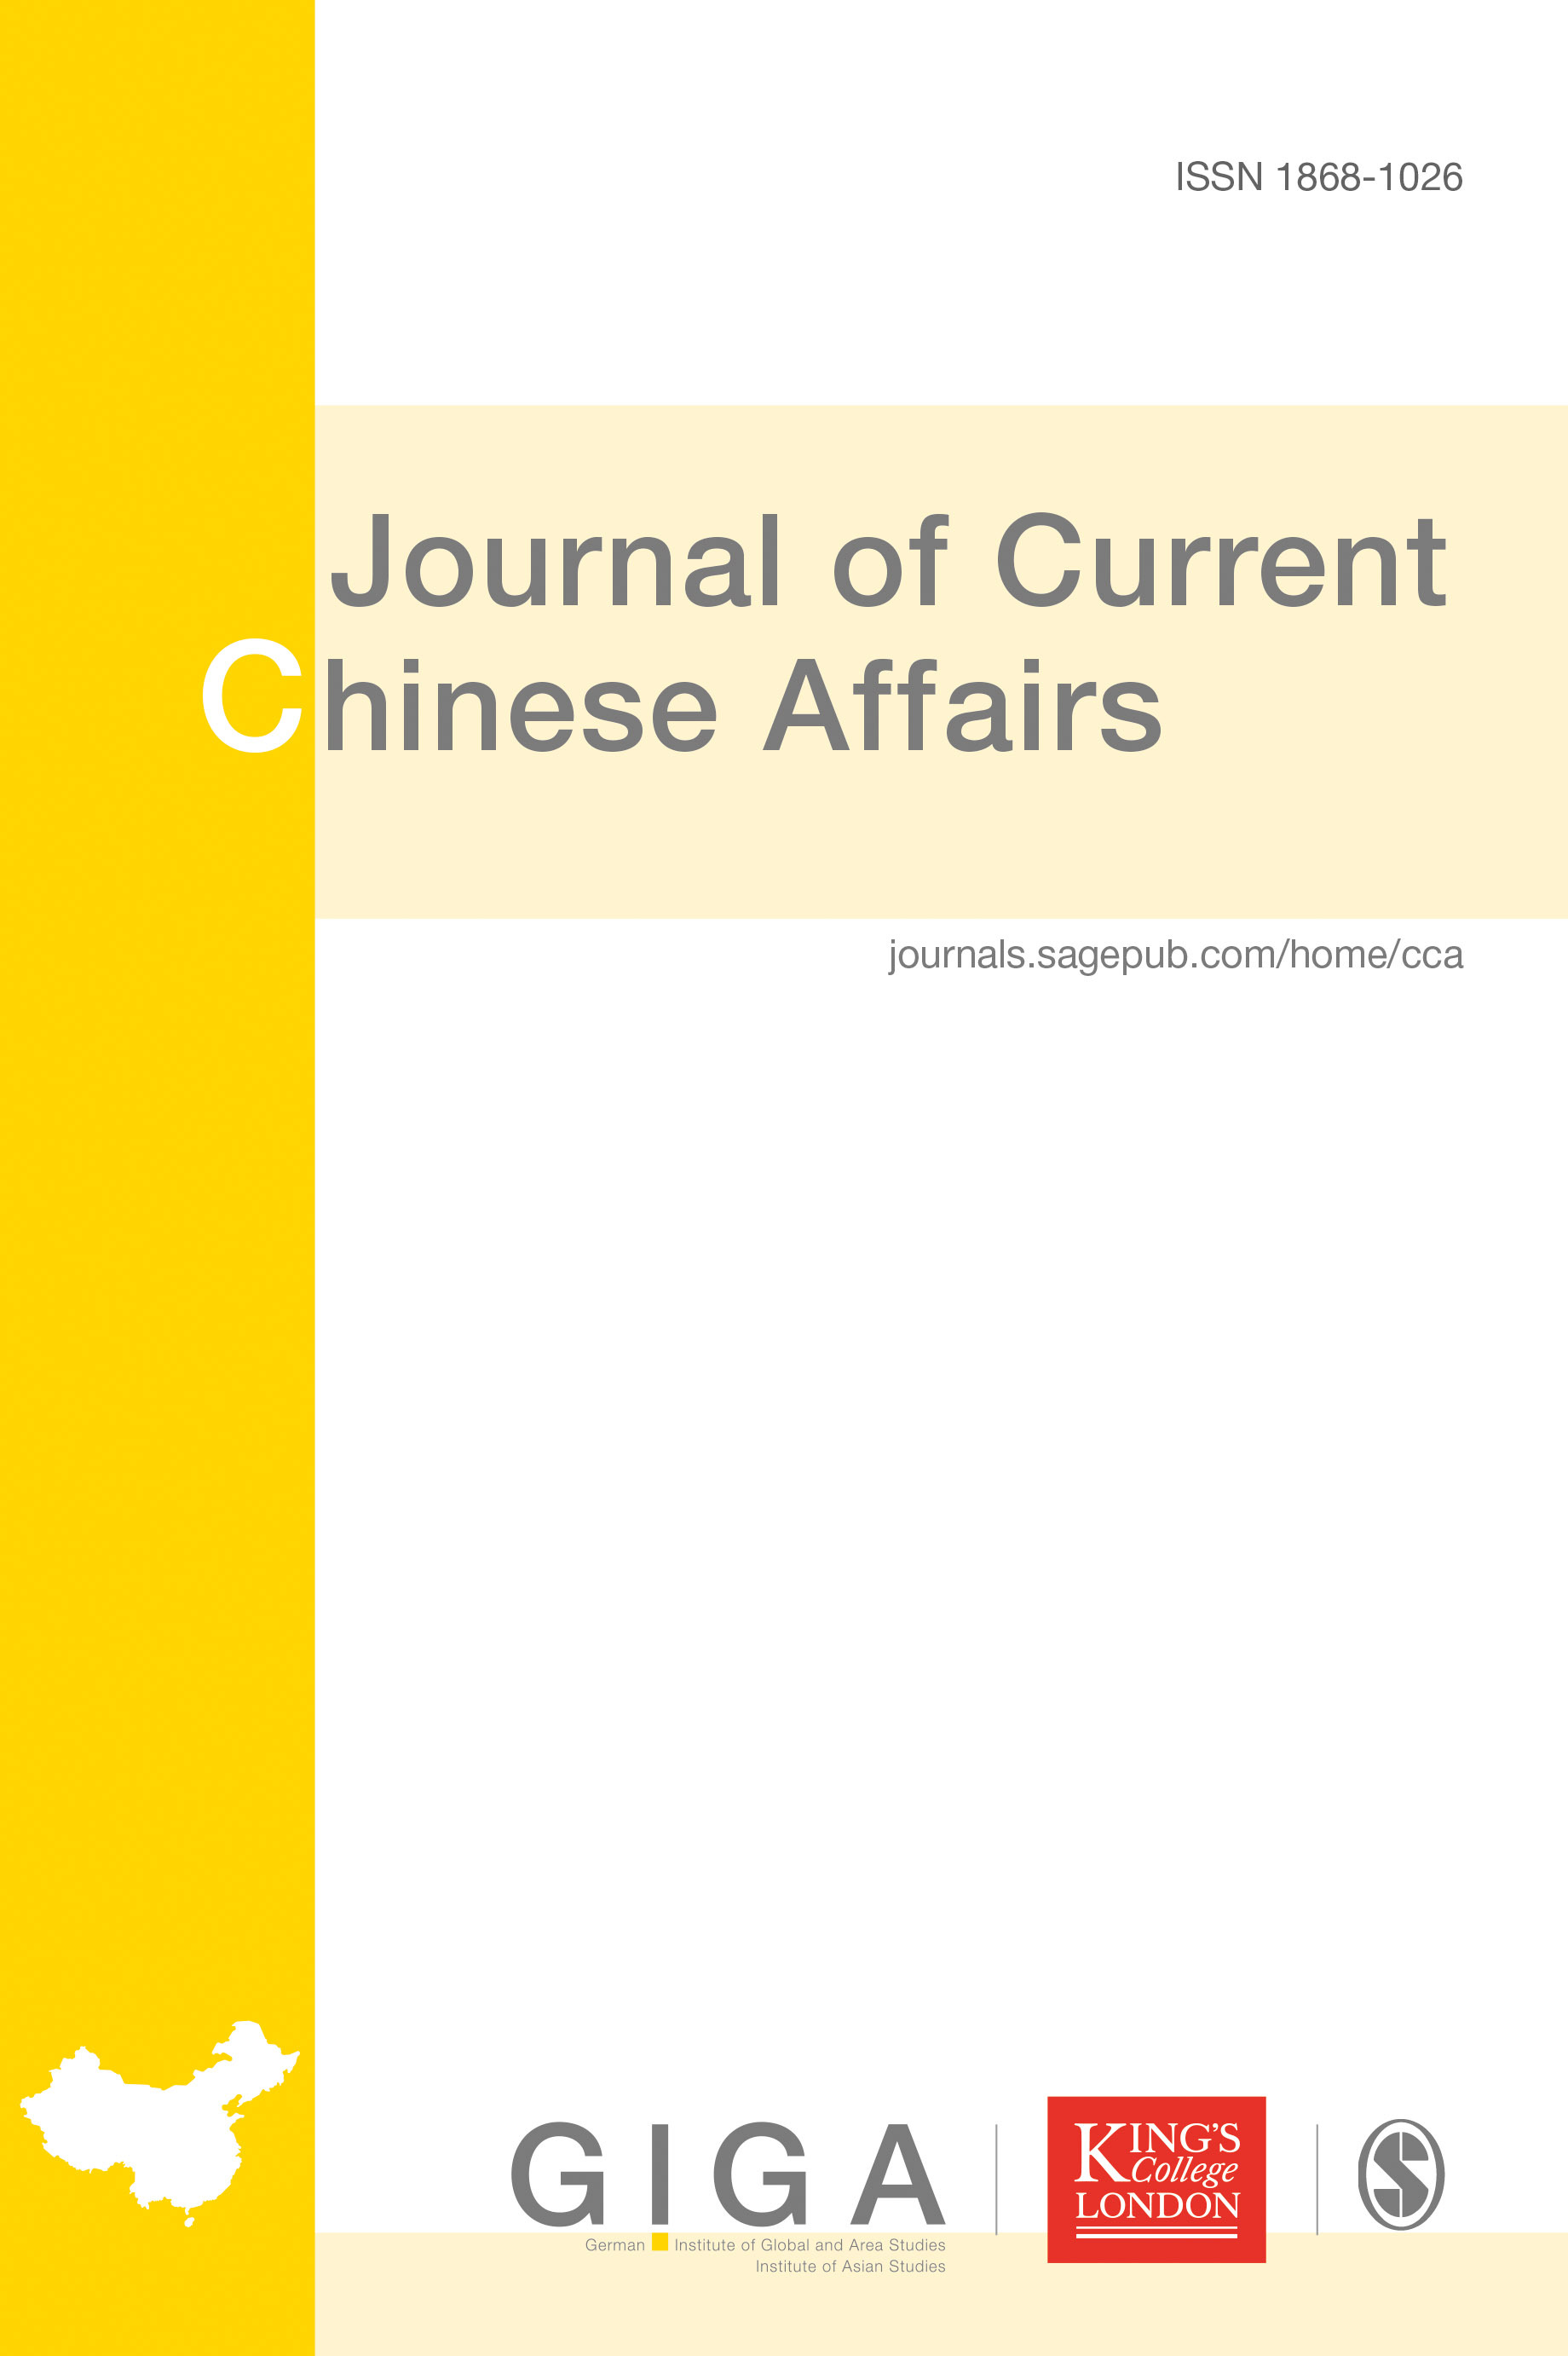  Journal of Current Chinese Affairs